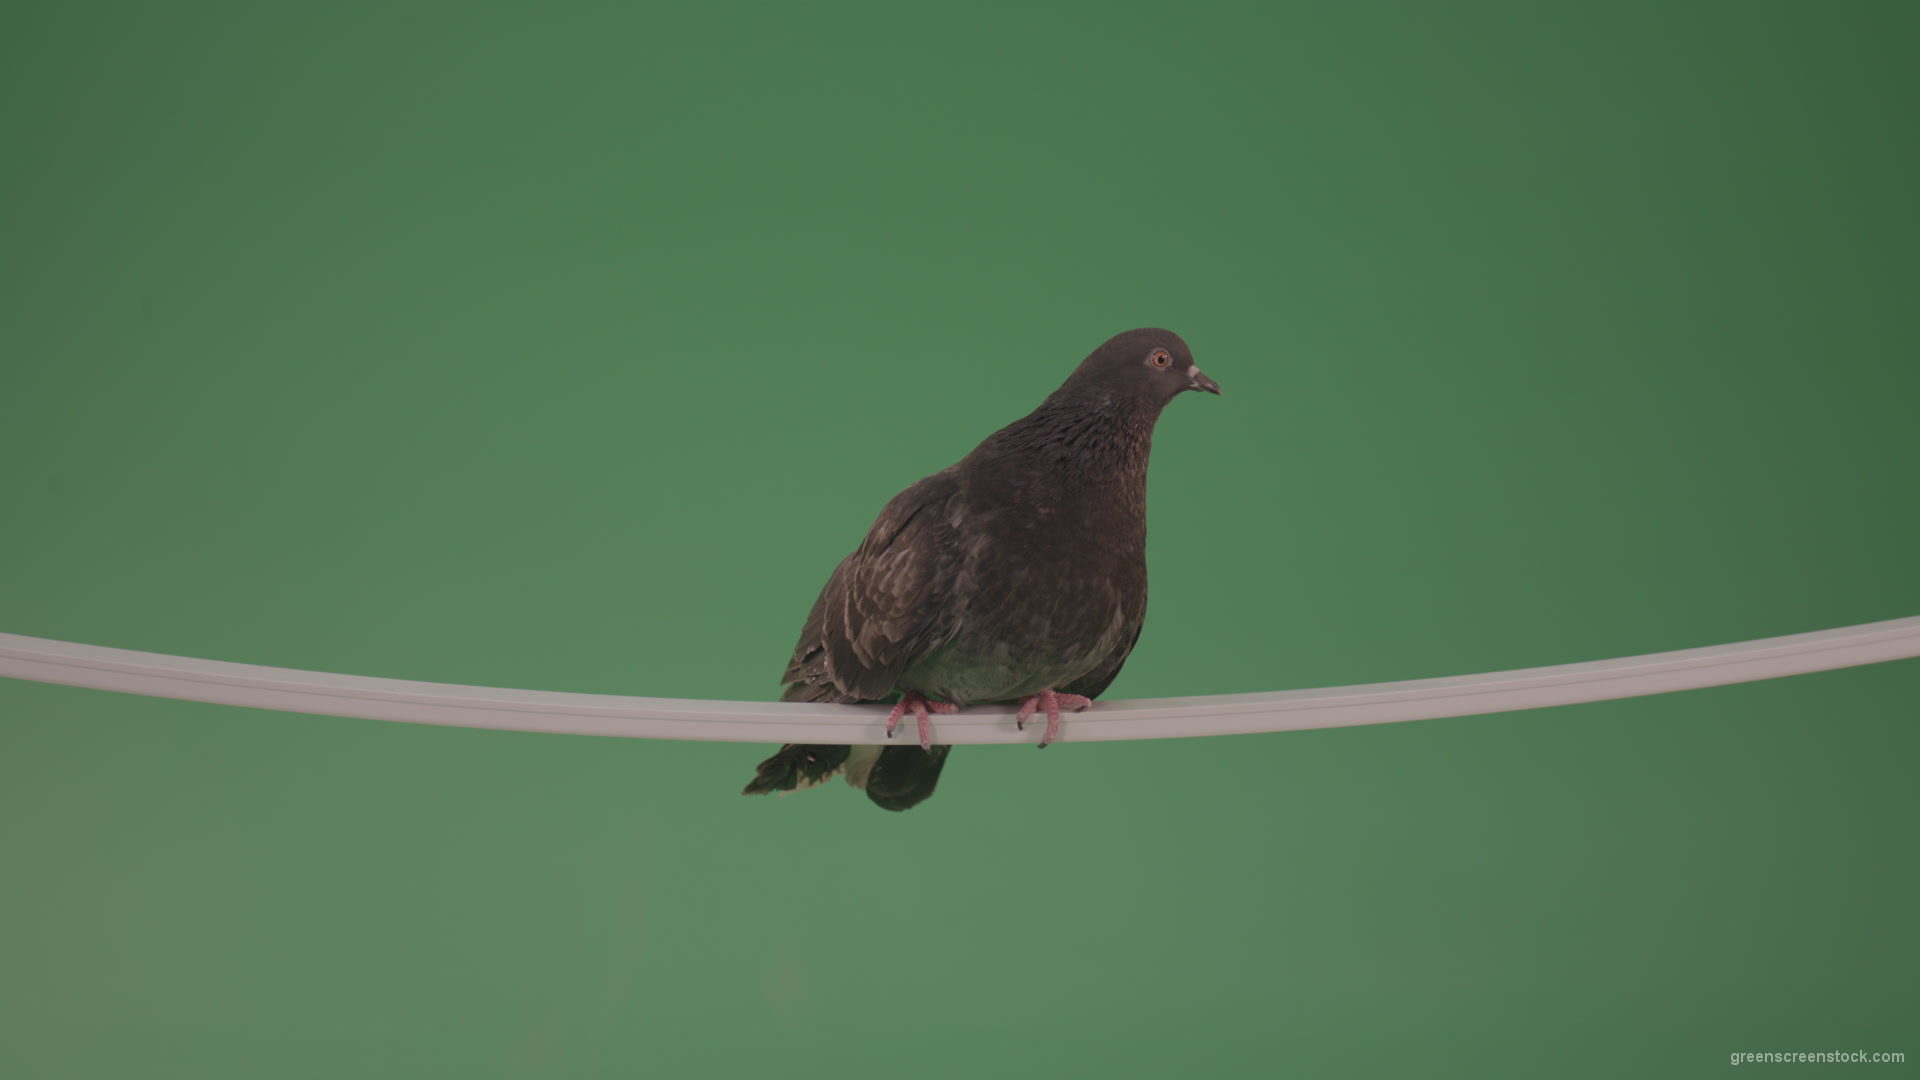 Bird-of-gray-color-doves-flies-from-branch-to-heaven-isolated-on-chromakey-background_006 Green Screen Stock